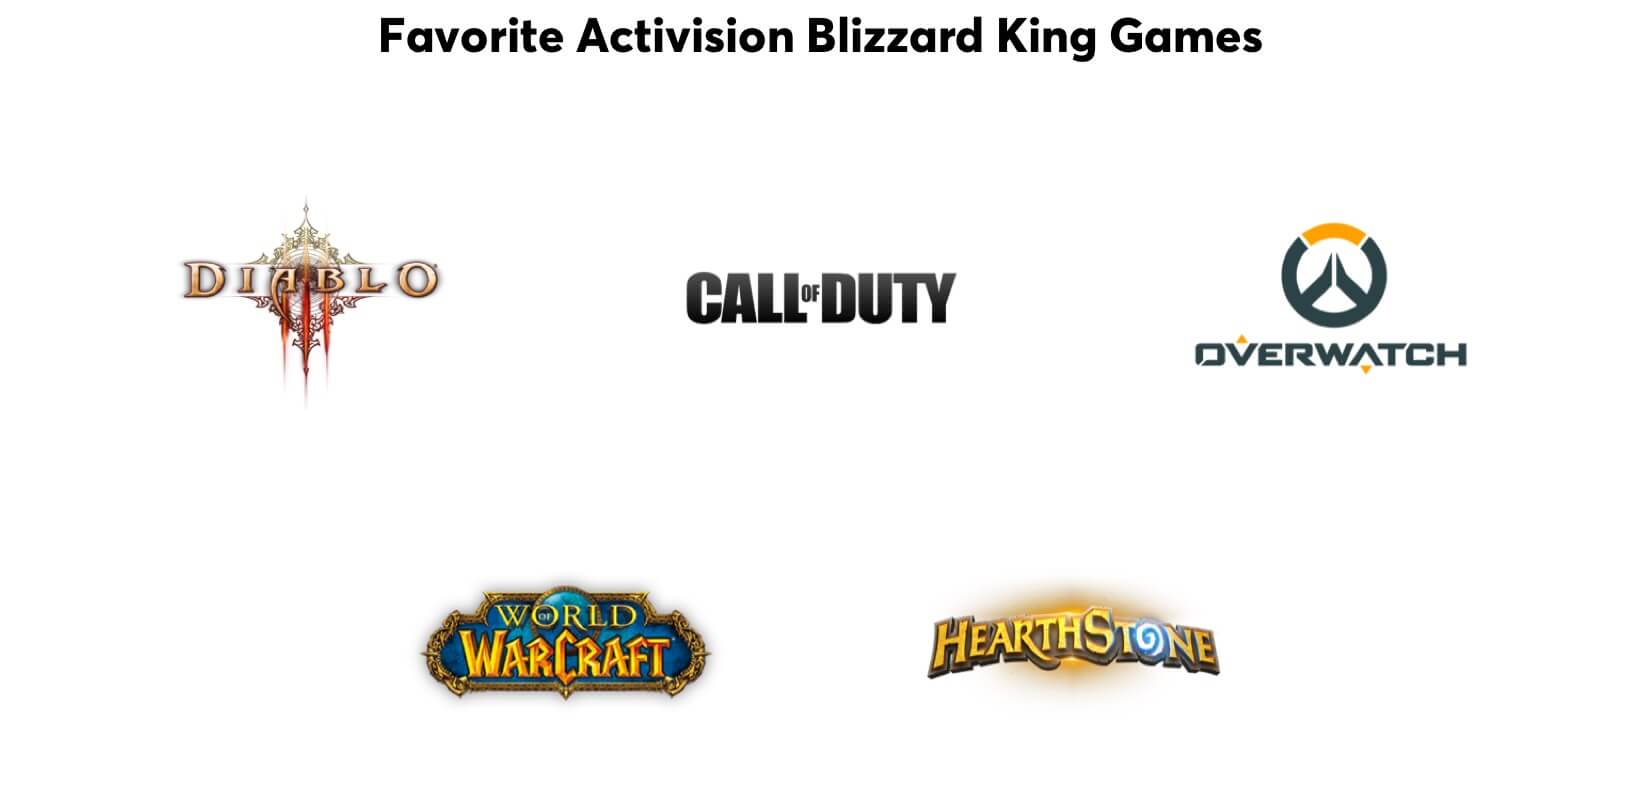 Player Ones Favorite games: Diablo, Call of Duty, Overwatch, World of WarCraft, and Hearthstone